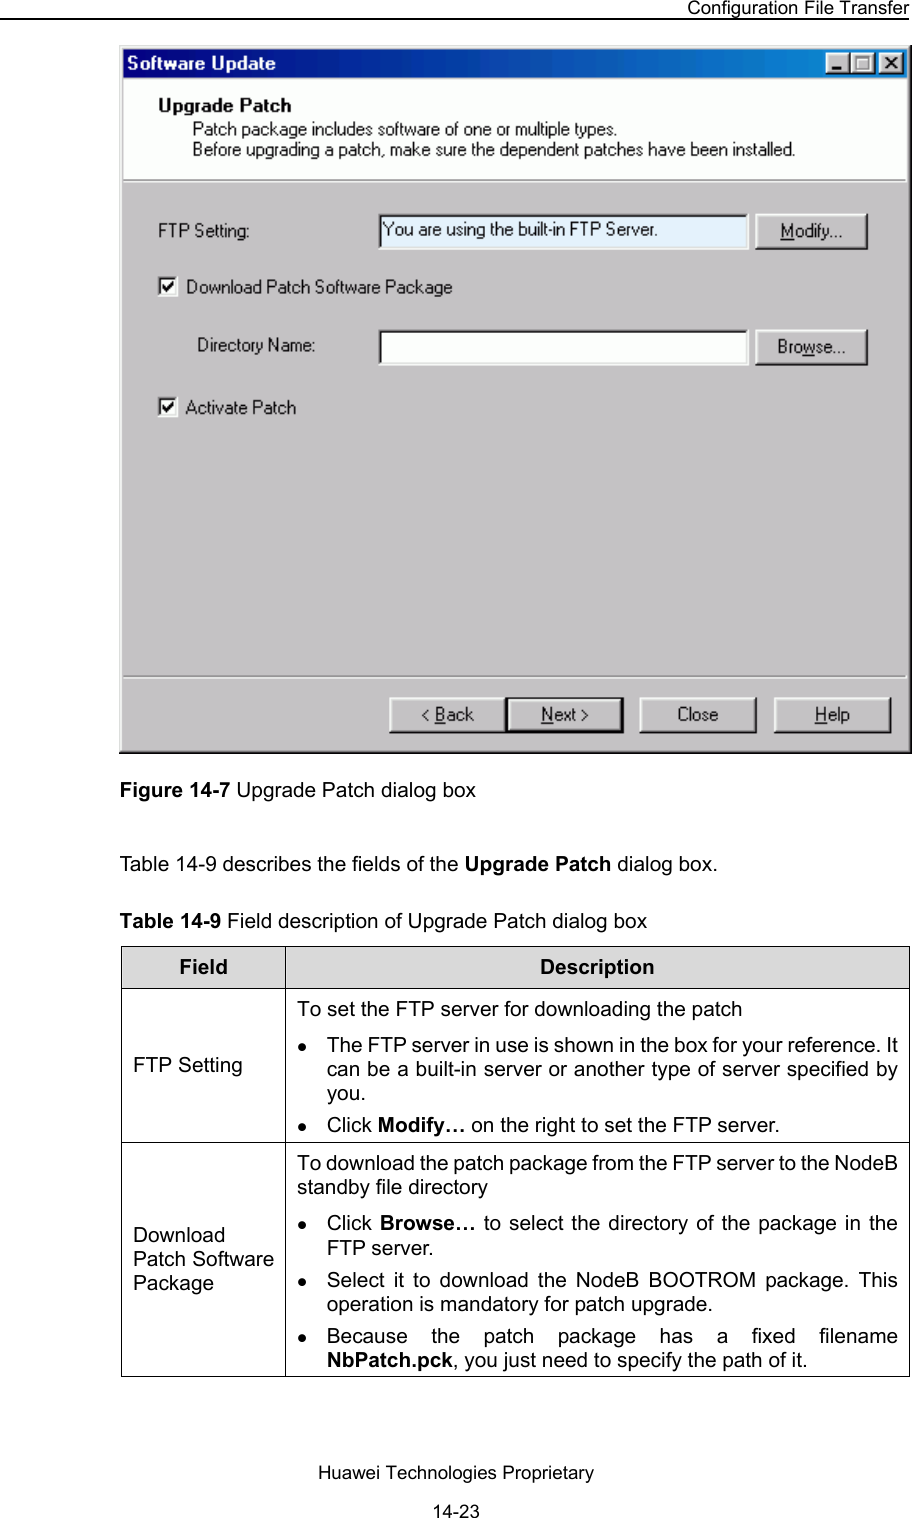 NodeB LMT User Guide Chapter 14  NodeB Software Update and Data Configuration File Transfer Huawei Technologies Proprietary 14-23  Figure 14-7 Upgrade Patch dialog box Table 14-9 describes the fields of the Upgrade Patch dialog box.  Table 14-9 Field description of Upgrade Patch dialog box  Field   Description  FTP Setting To set the FTP server for downloading the patch  z The FTP server in use is shown in the box for your reference. It can be a built-in server or another type of server specified by you. z Click Modify… on the right to set the FTP server. Download Patch Software Package To download the patch package from the FTP server to the NodeB standby file directory z Click Browse… to select the directory of the package in the FTP server.  z Select it to download the NodeB BOOTROM package. This operation is mandatory for patch upgrade.  z Because the patch package has a fixed filename NbPatch.pck, you just need to specify the path of it.  